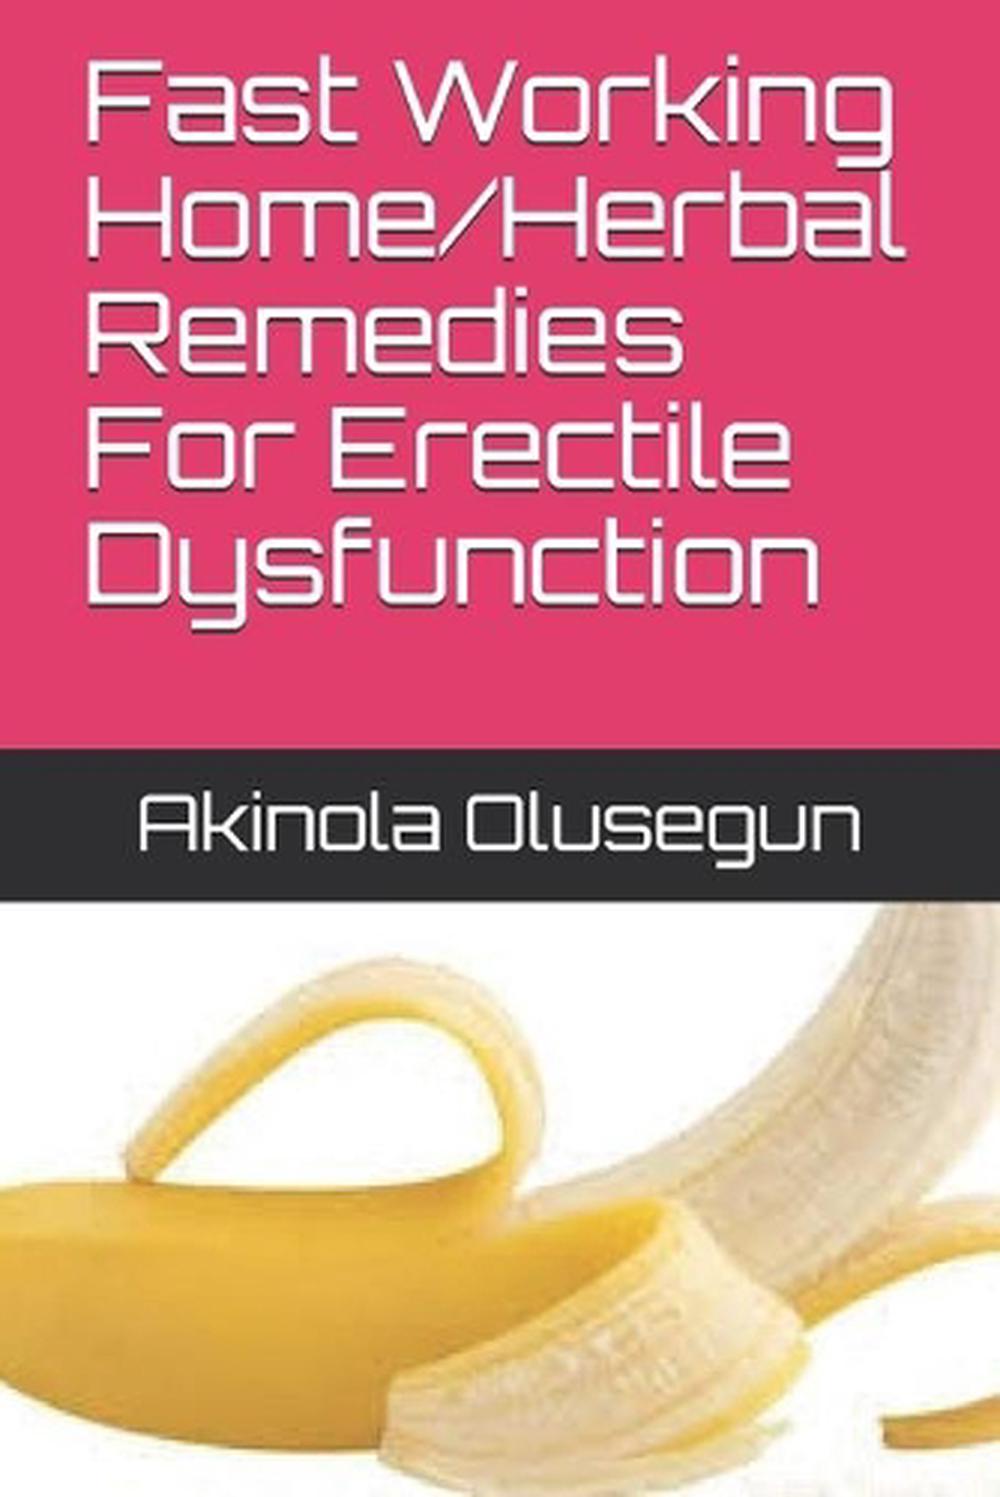 Fast Working Homeherbal Remedies For Erectile Dysfunction By Akinola 8492